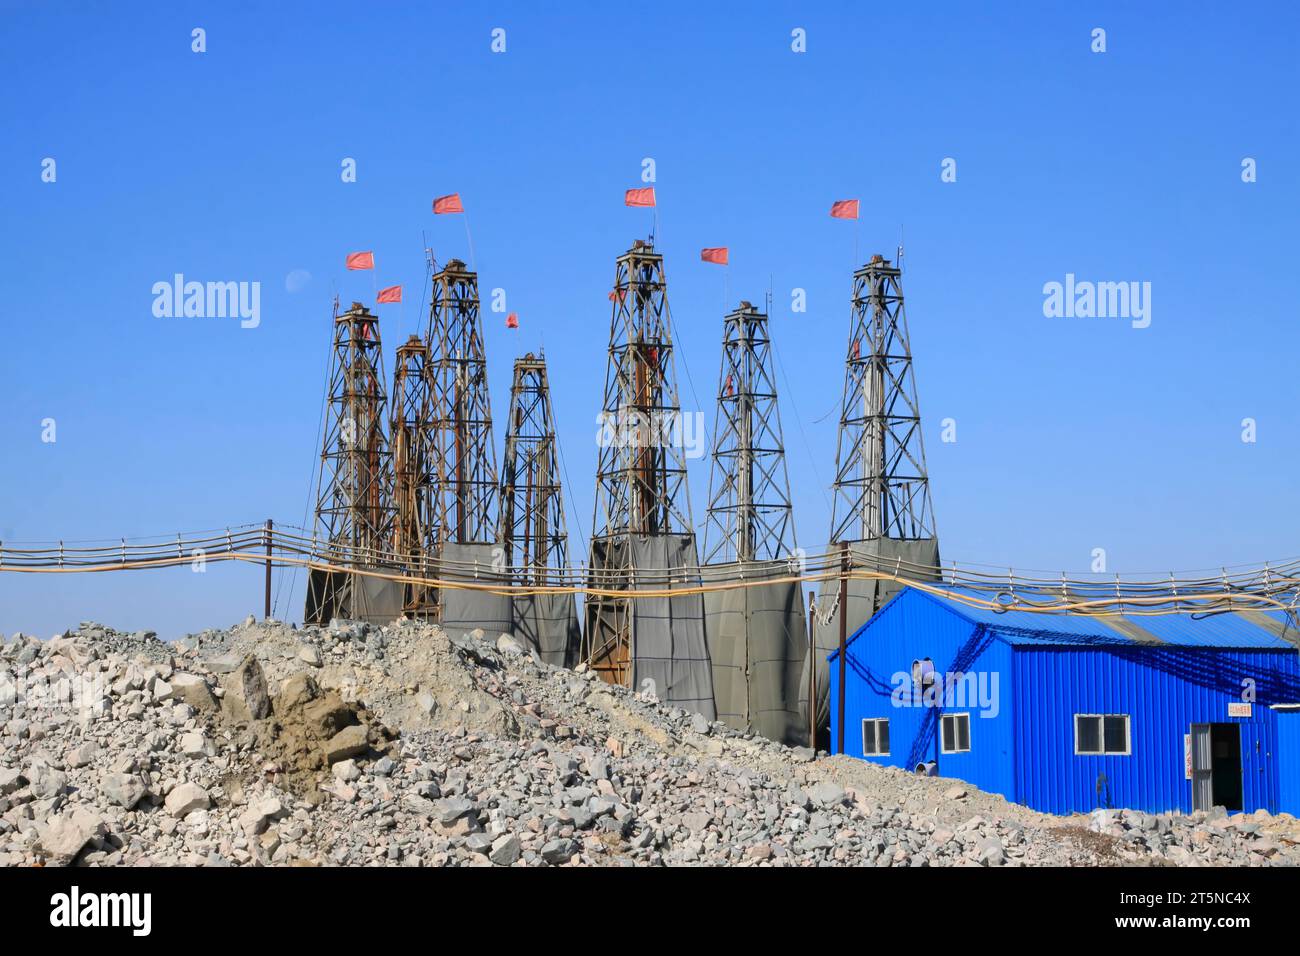 Drilling rig derrick and metal housing under blue sky Stock Photo